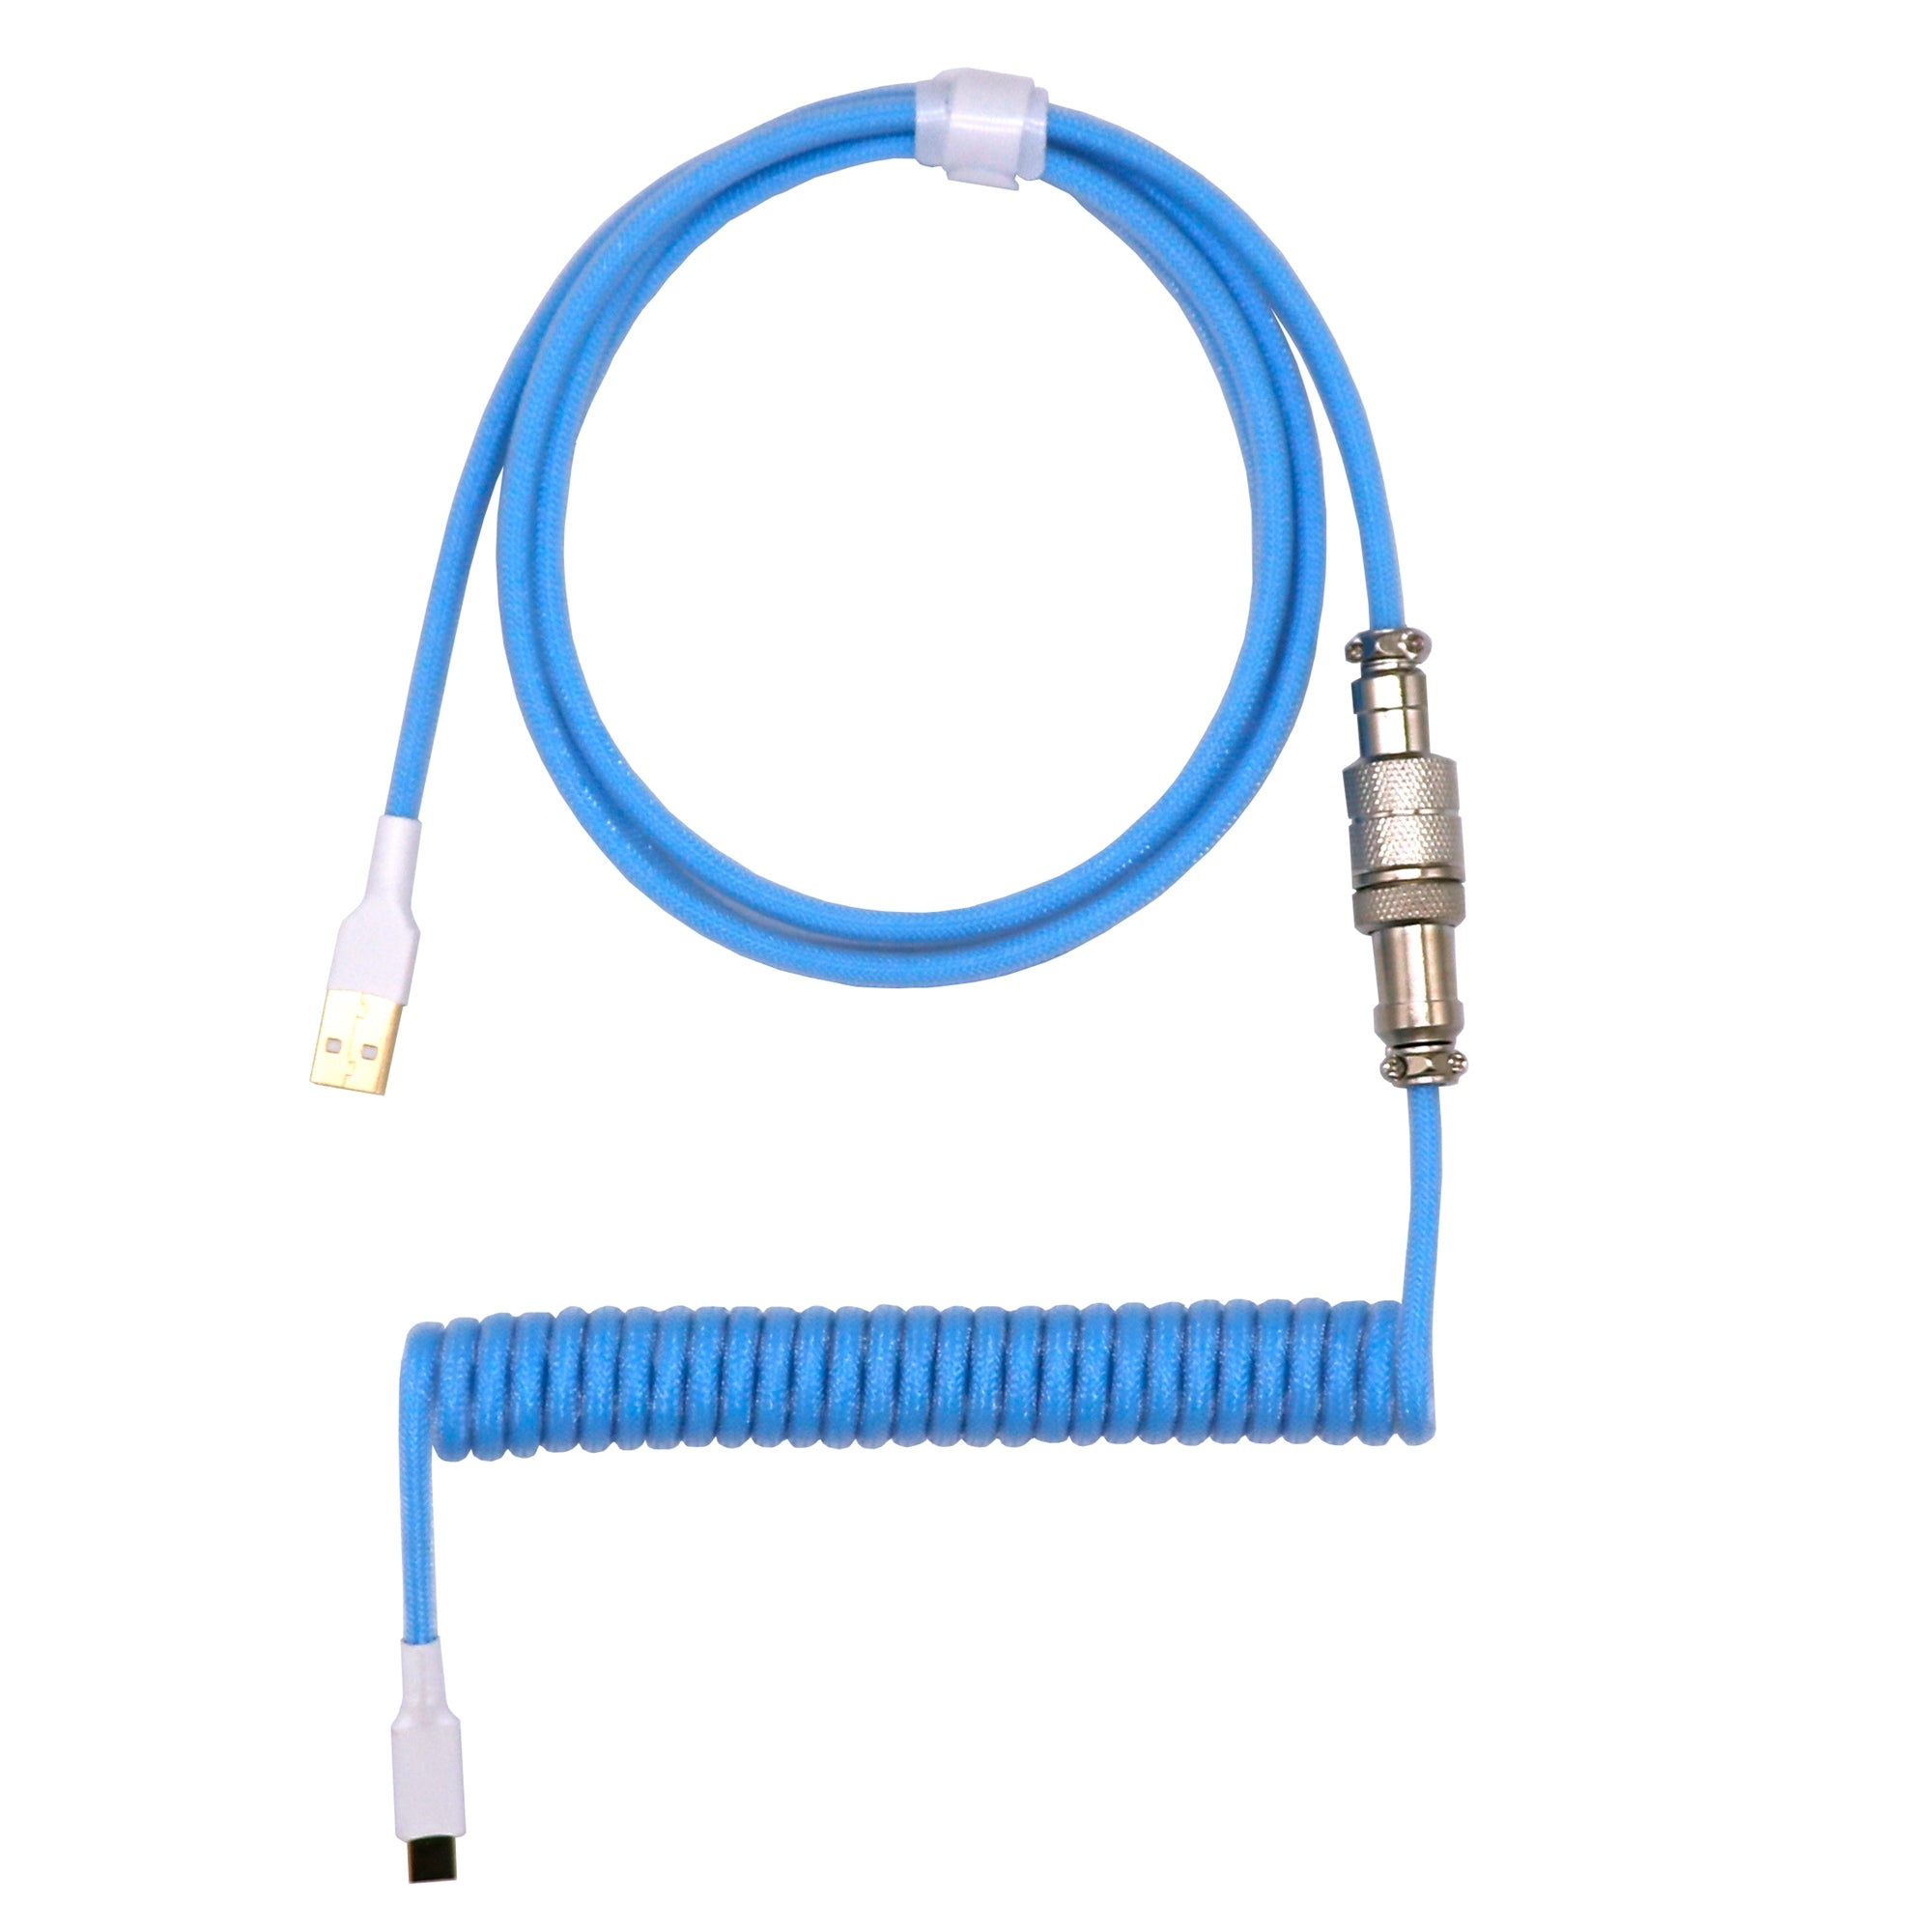 Coiled Keyboard Cable - SKY BLUE